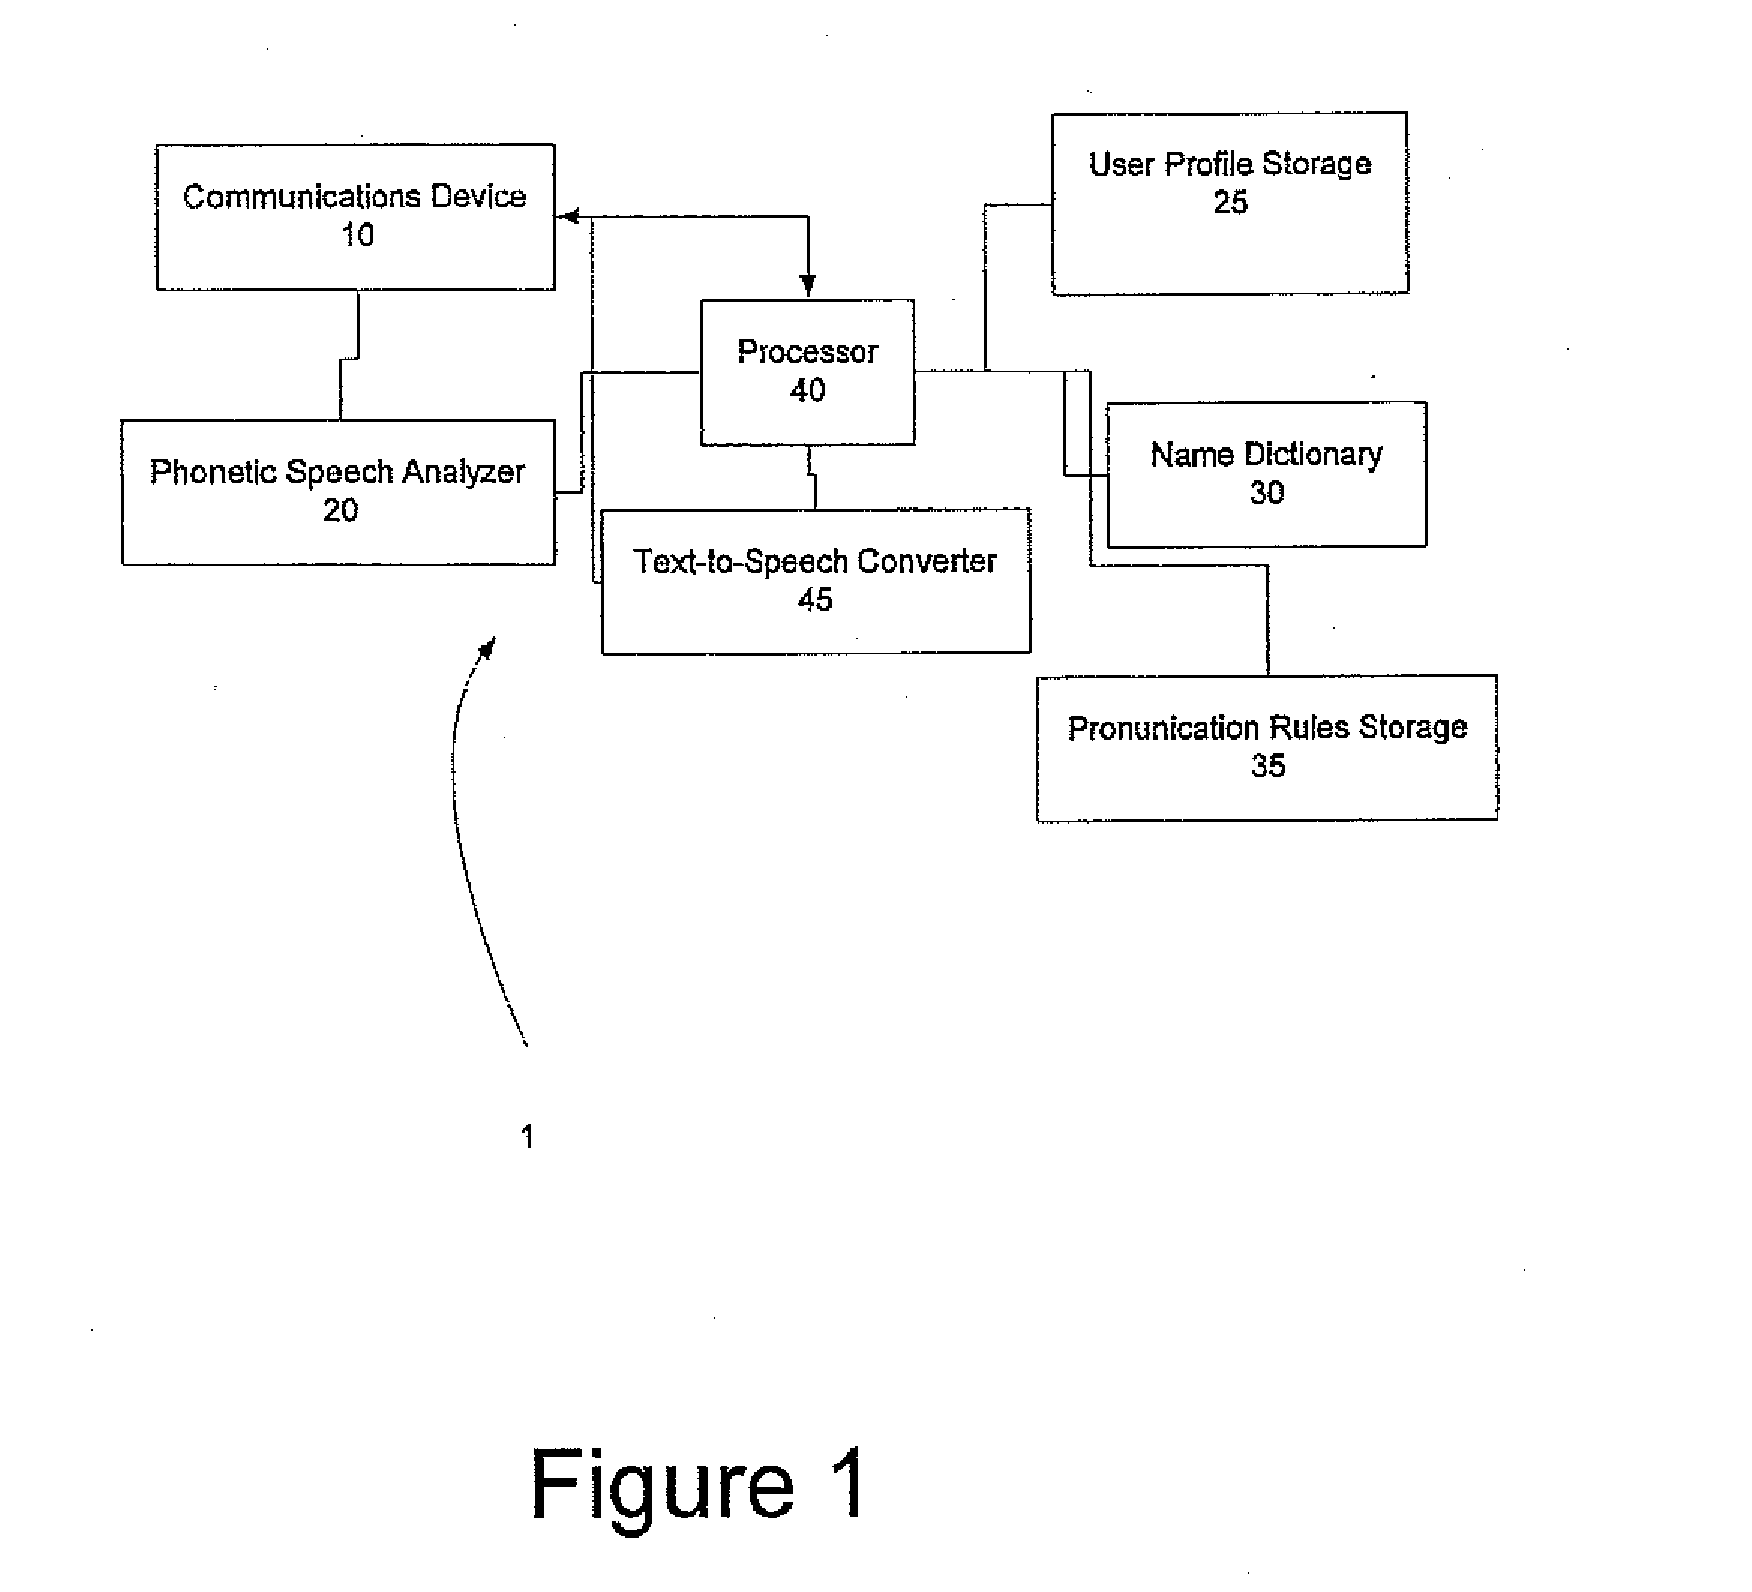 System, Method and Program for Customized Voice Communication